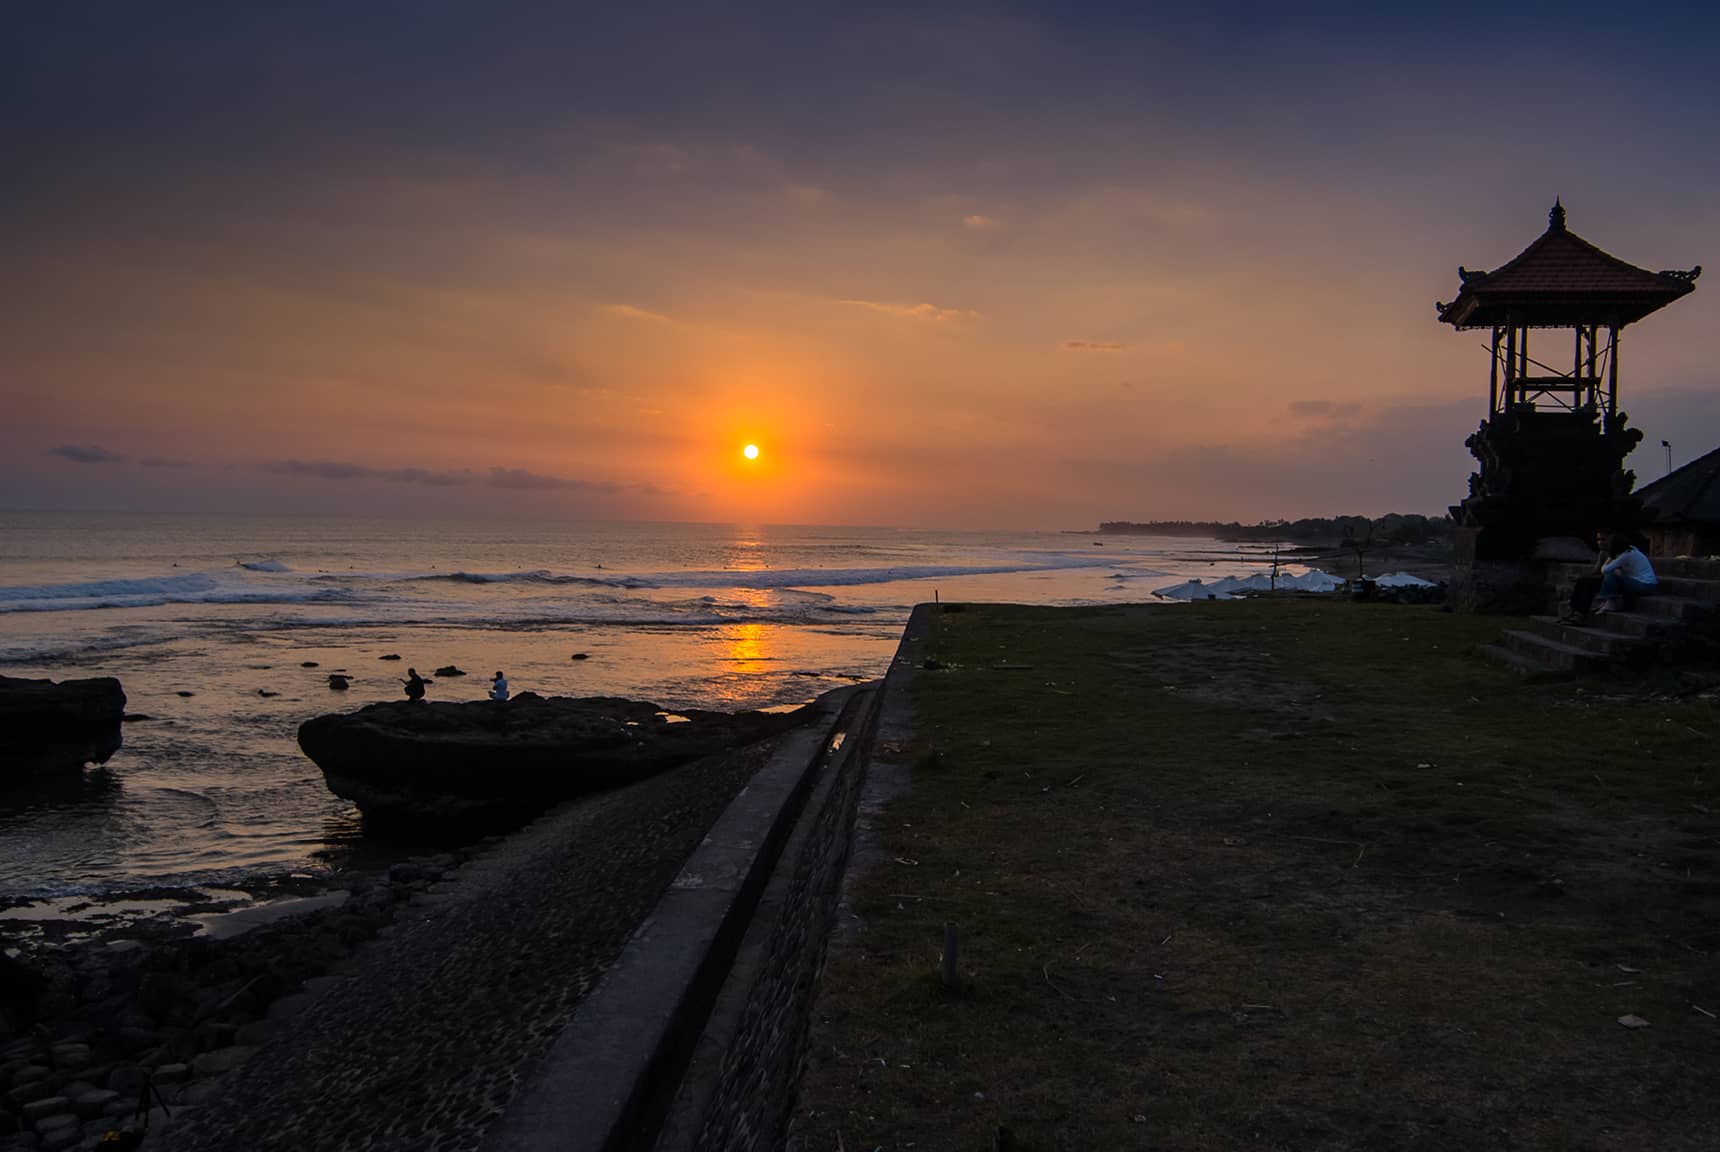 Professional photos of sunsets in Bali Indonesia - Echo Beach temple